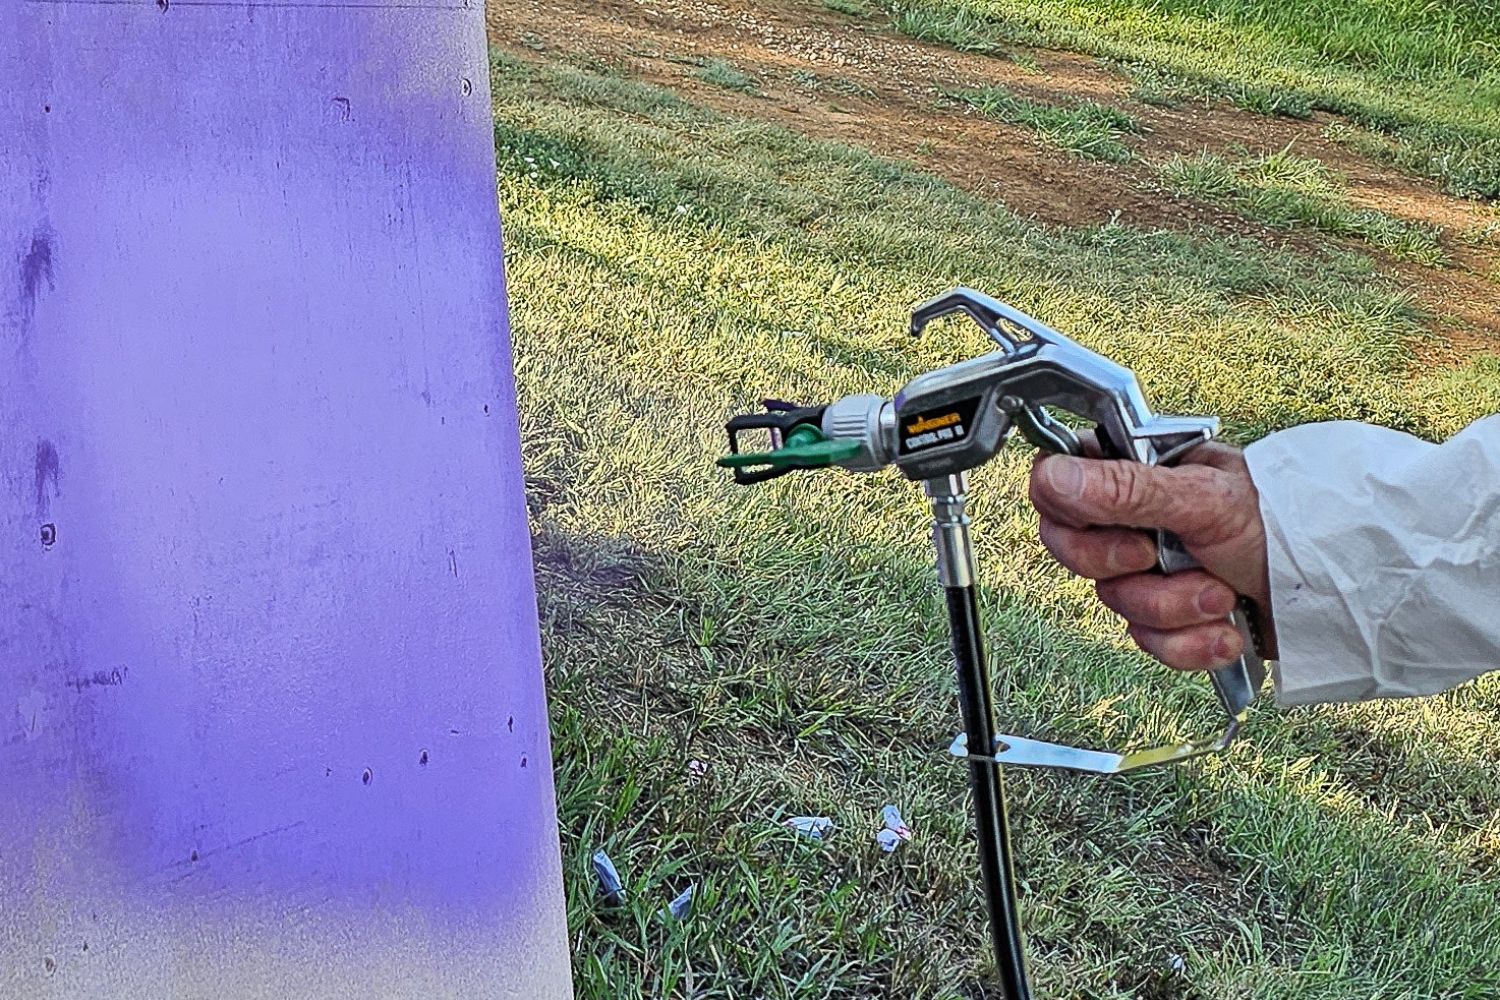 A person using the Wagner Paint sprayer to paint a white item purple